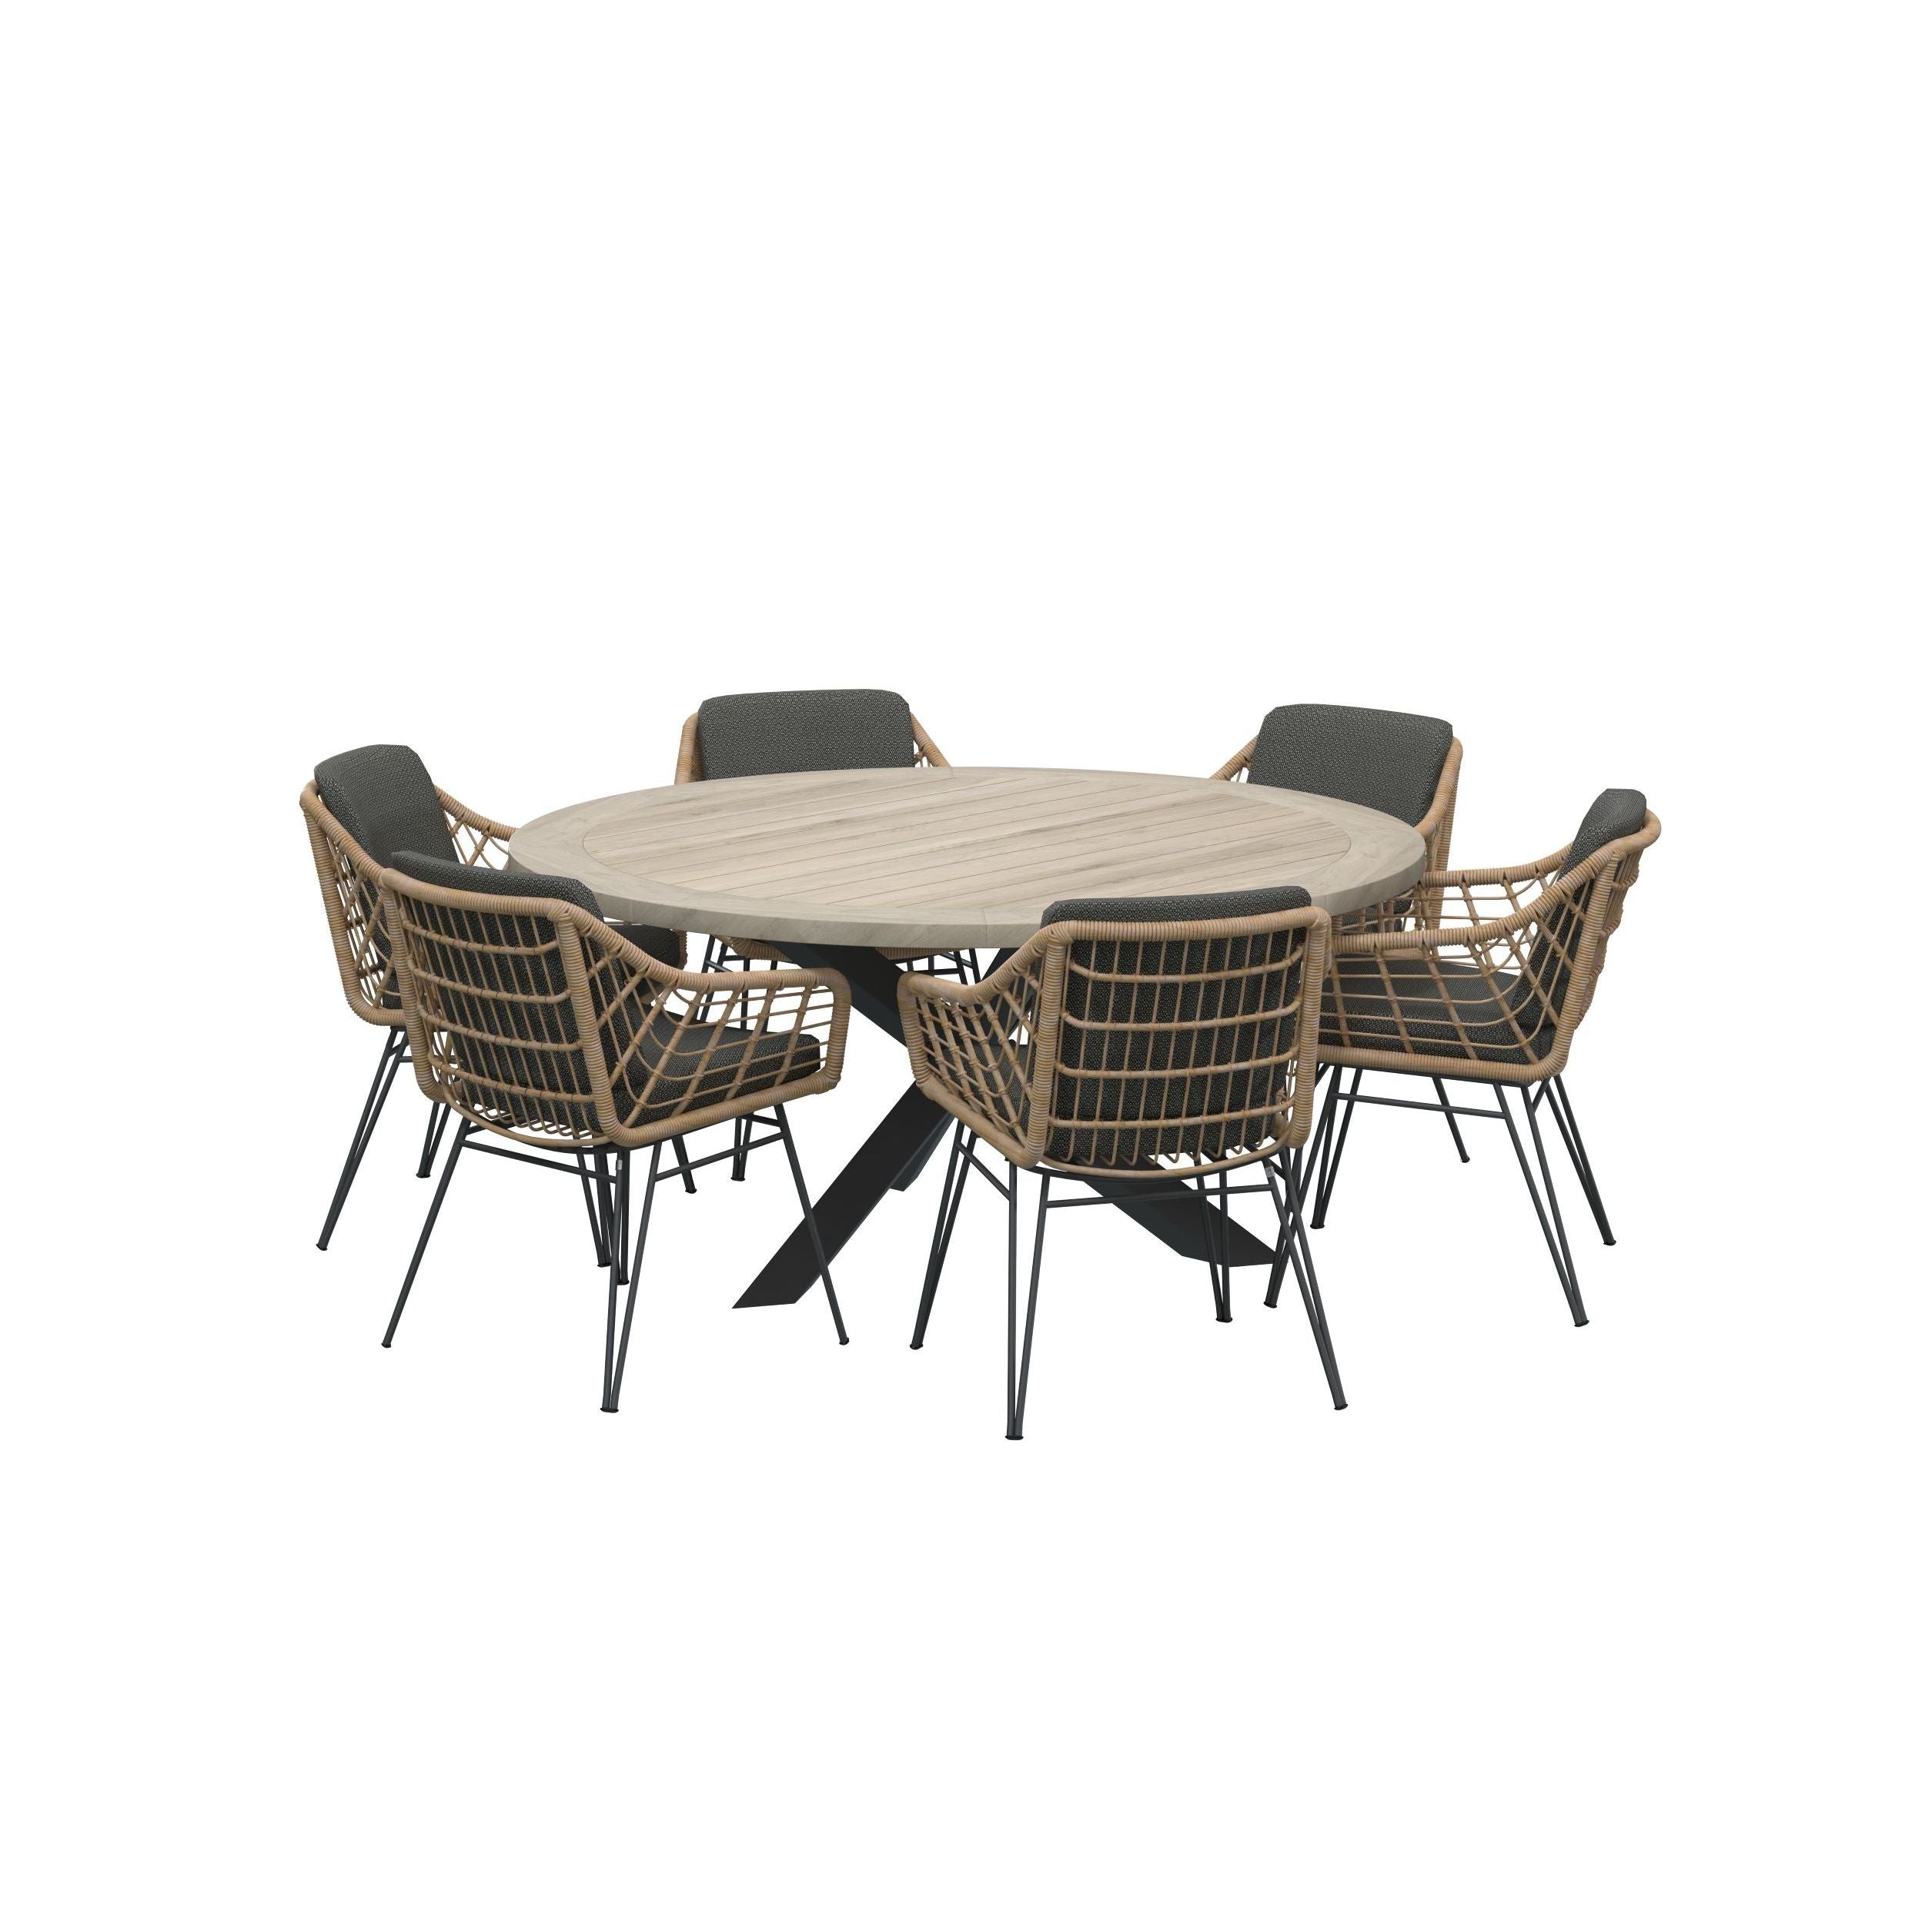 4 Seasons Outdoor Cottage Hara 6 seater Dining set with Round Louvre Teak Dining Table